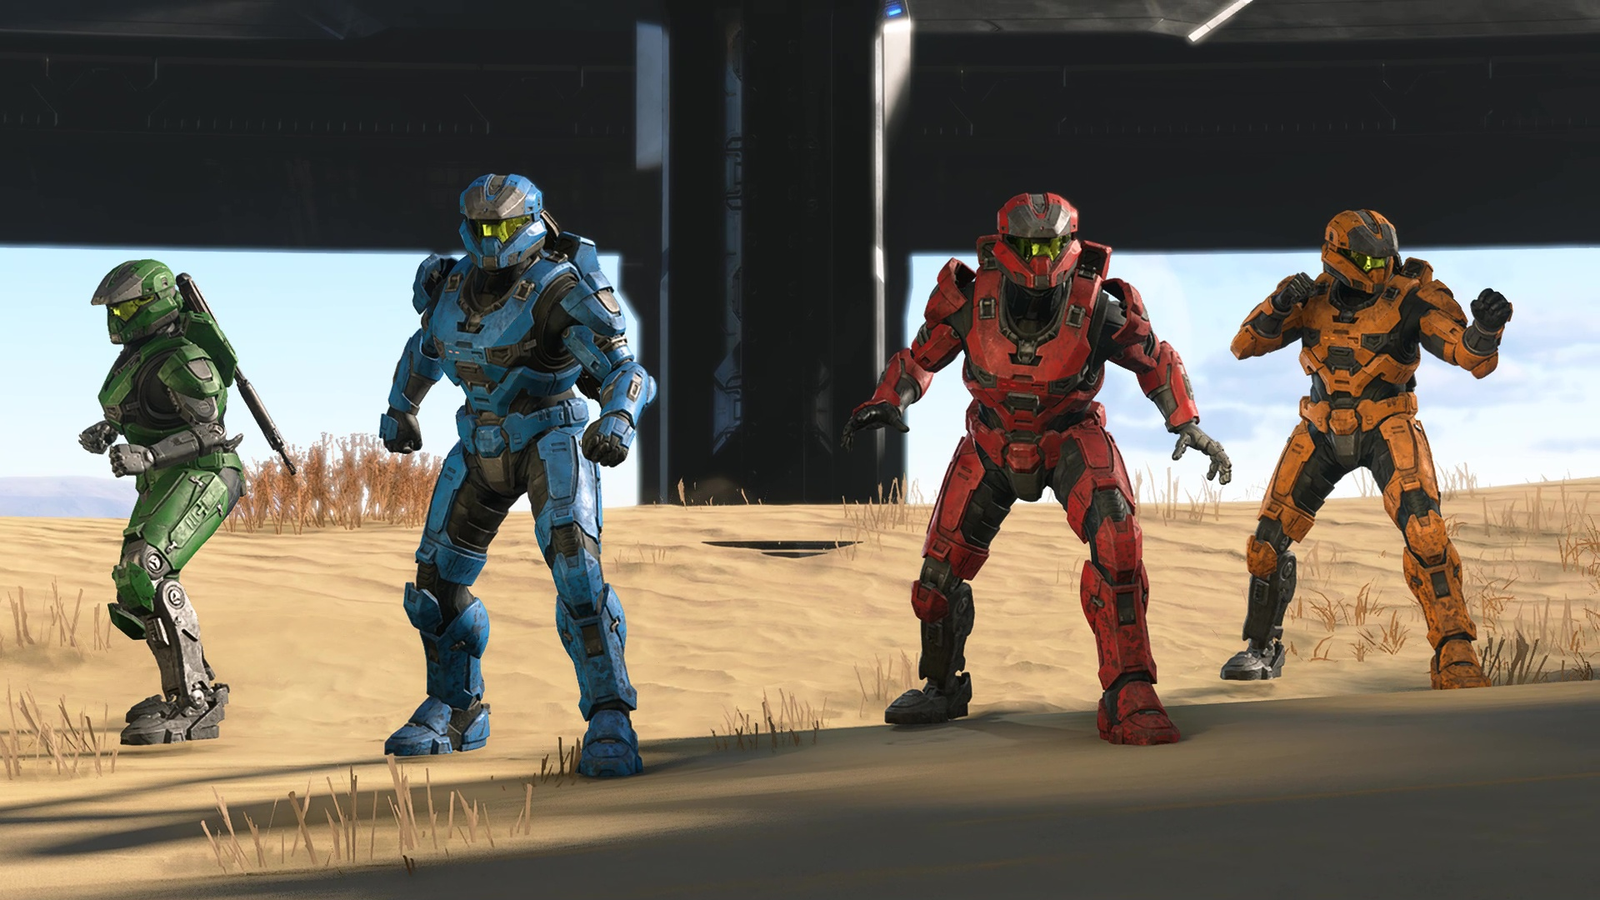 Character Guide, Halo: The Series